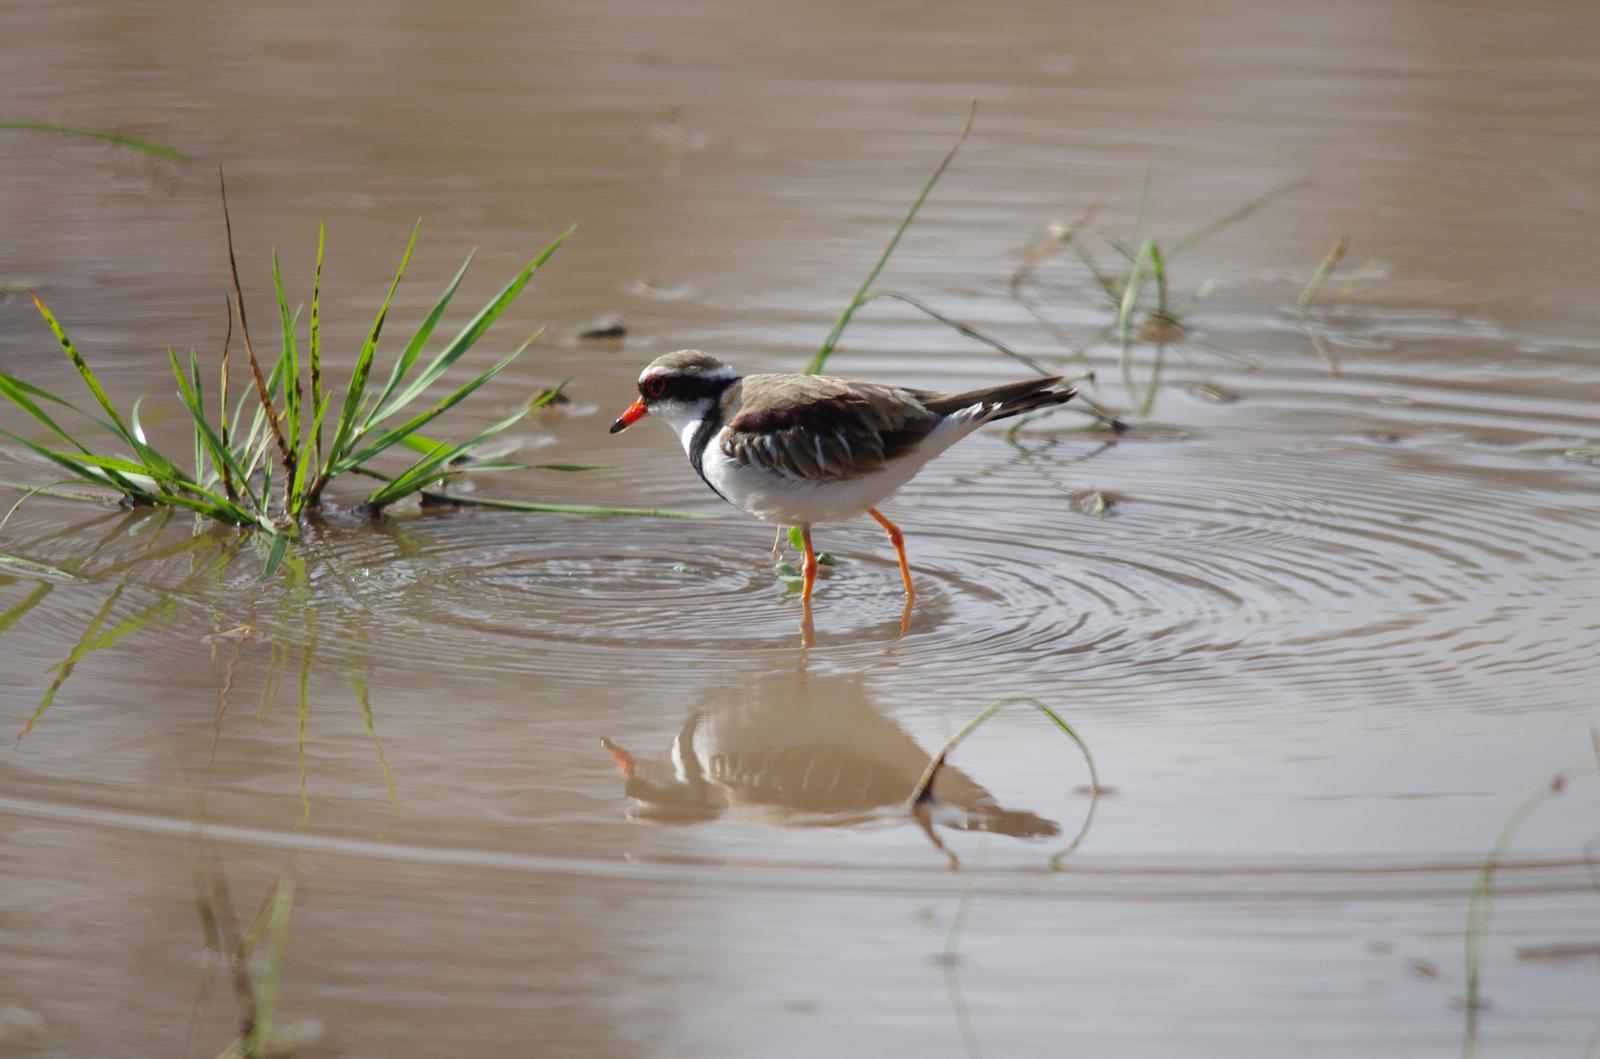 Black-fronted Dotterel Photo by Richard Lund